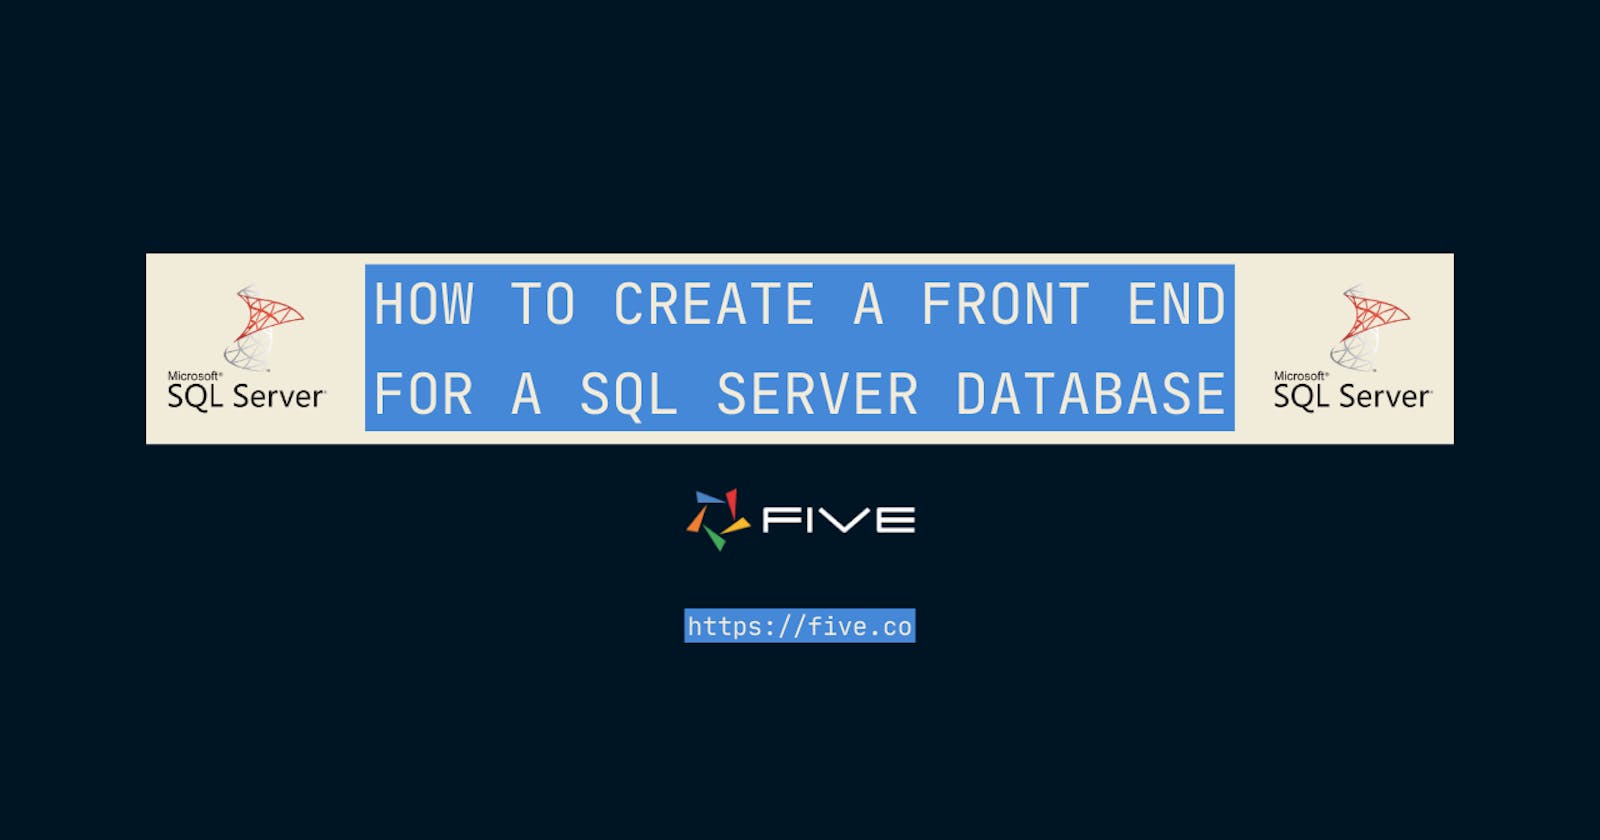 How to Create a Front End for a SQL Server Database in 4 Steps